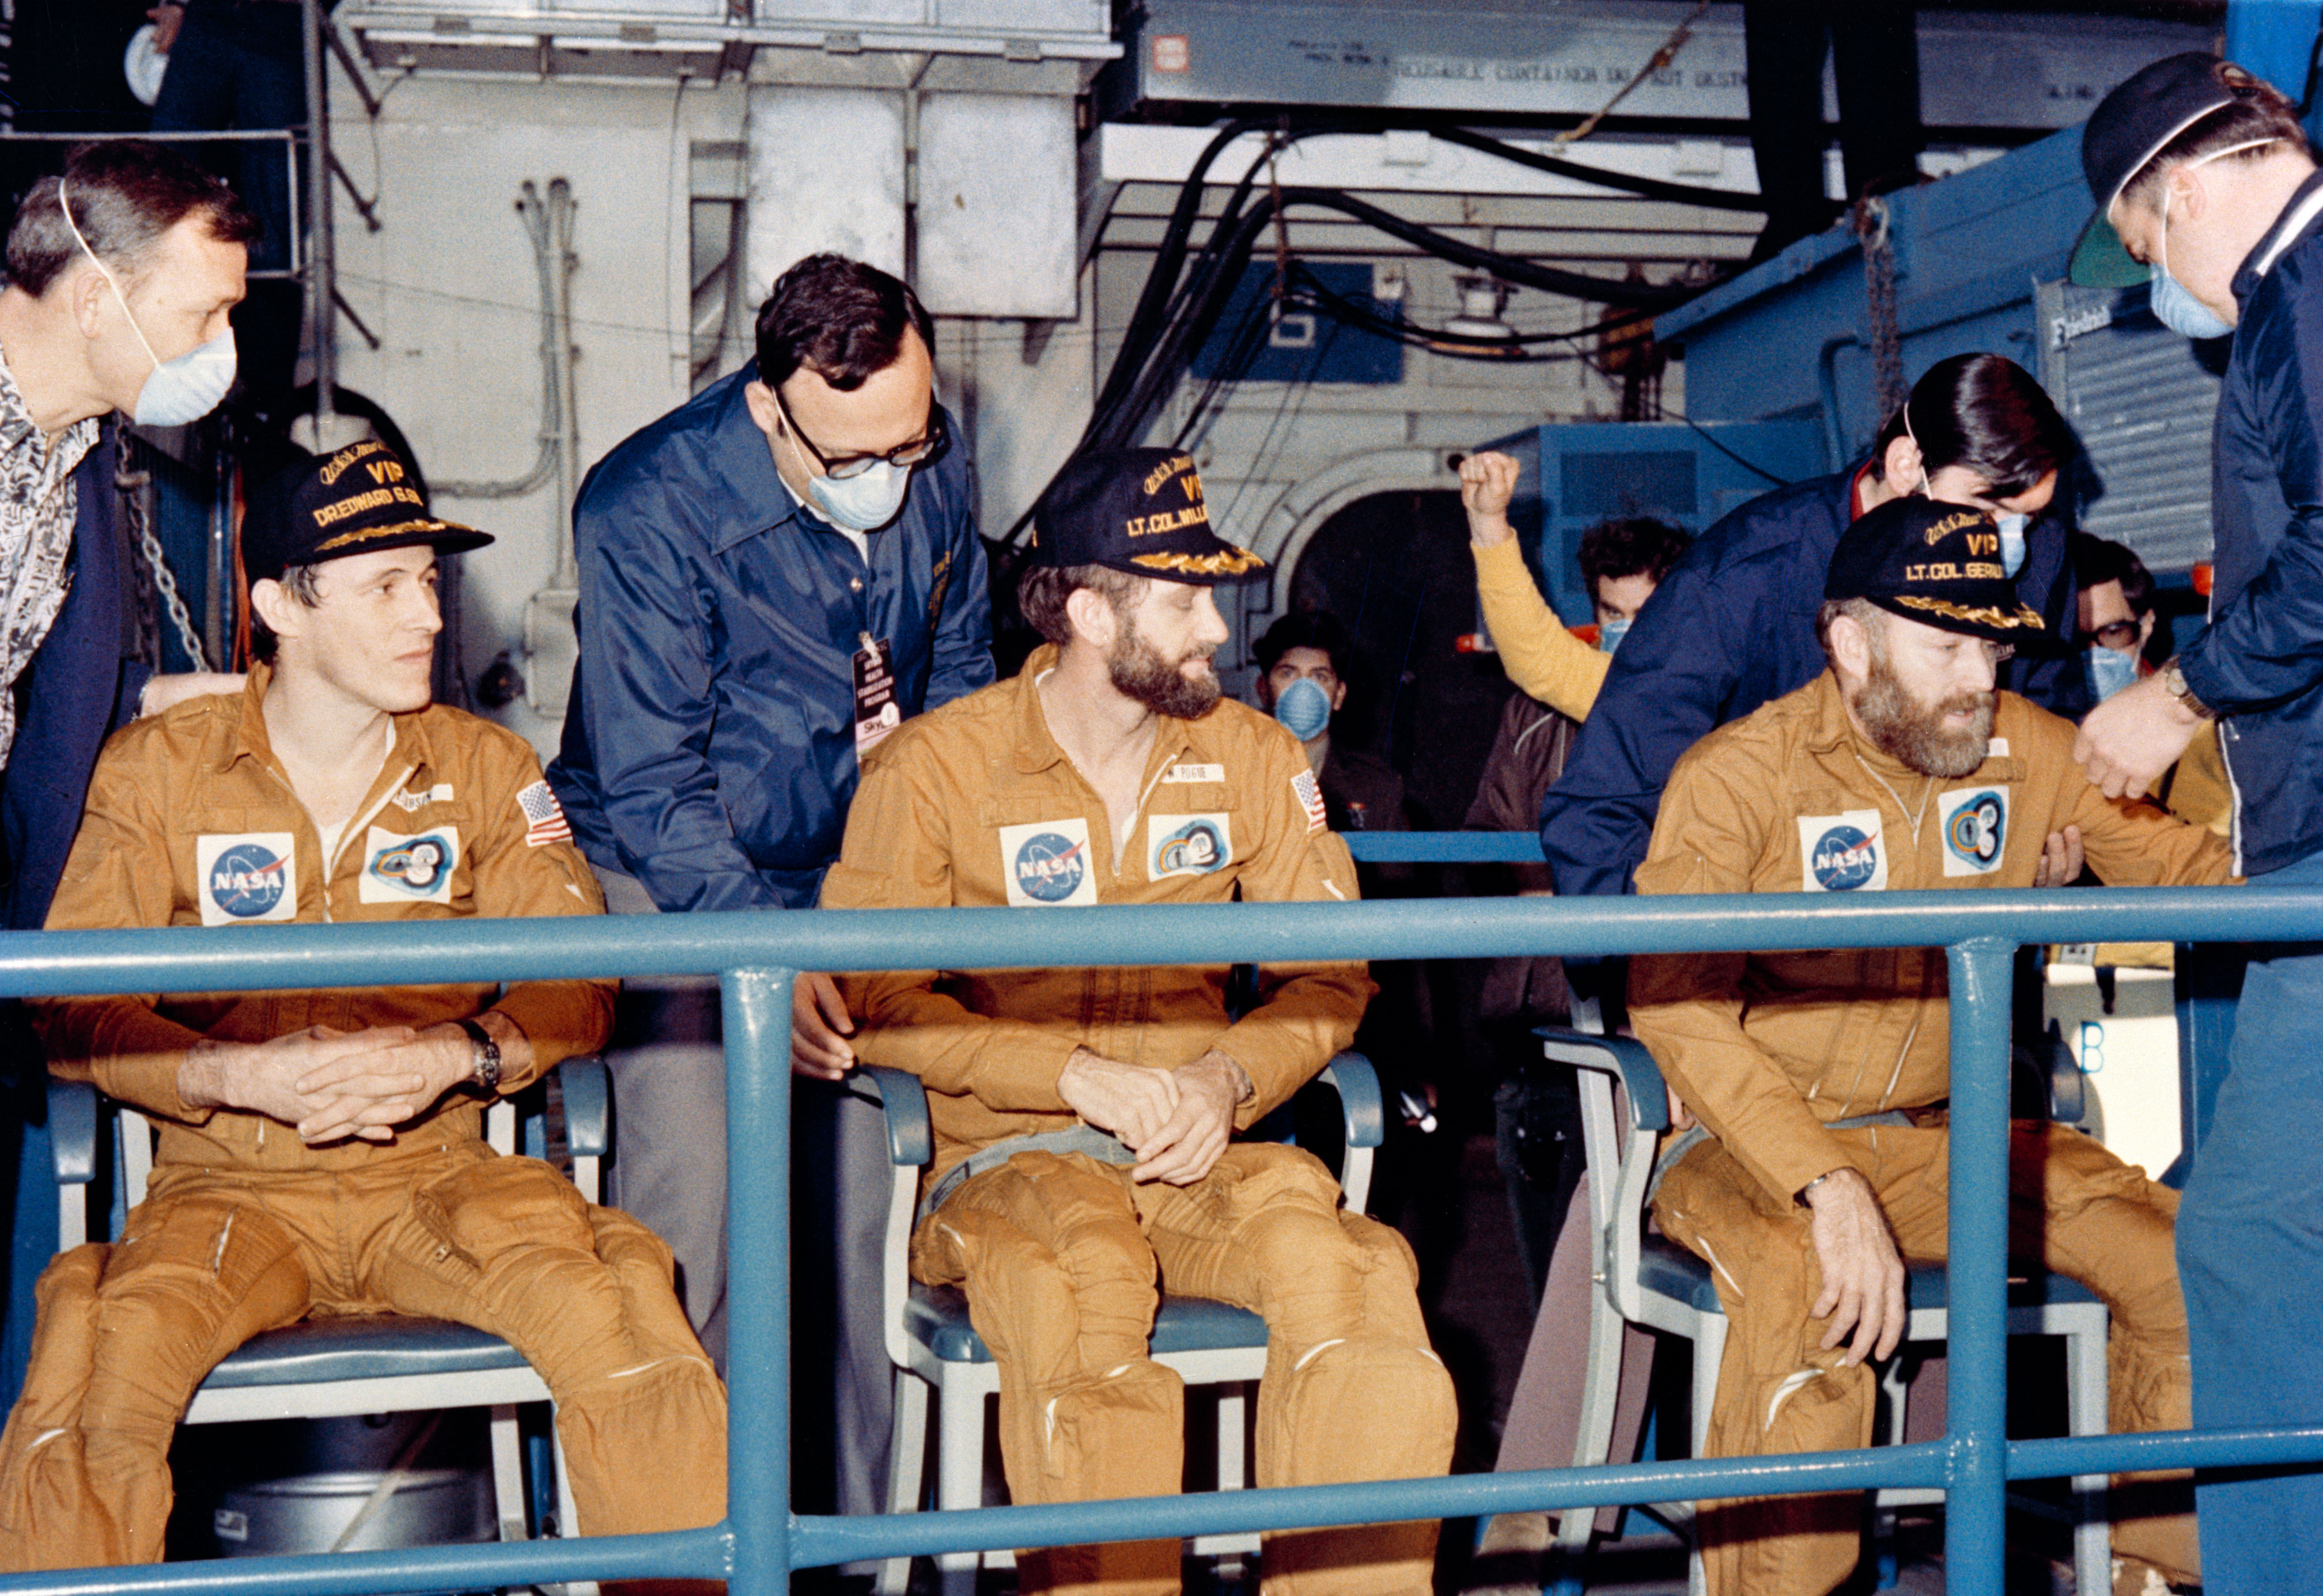 The crewmen of the third and final manned Skylab mission relax on the USS New Orleans, prime recovery ship for their mission, about an hour after their Command Module splashed down at 10:17 a.m. (CDT), Feb. 8, 1974. The splashdown, which occurred 176 statute miles from San Diego, ended 84 record-setting days of flight activity aboard the Skylab space station cluster in Earth orbit.